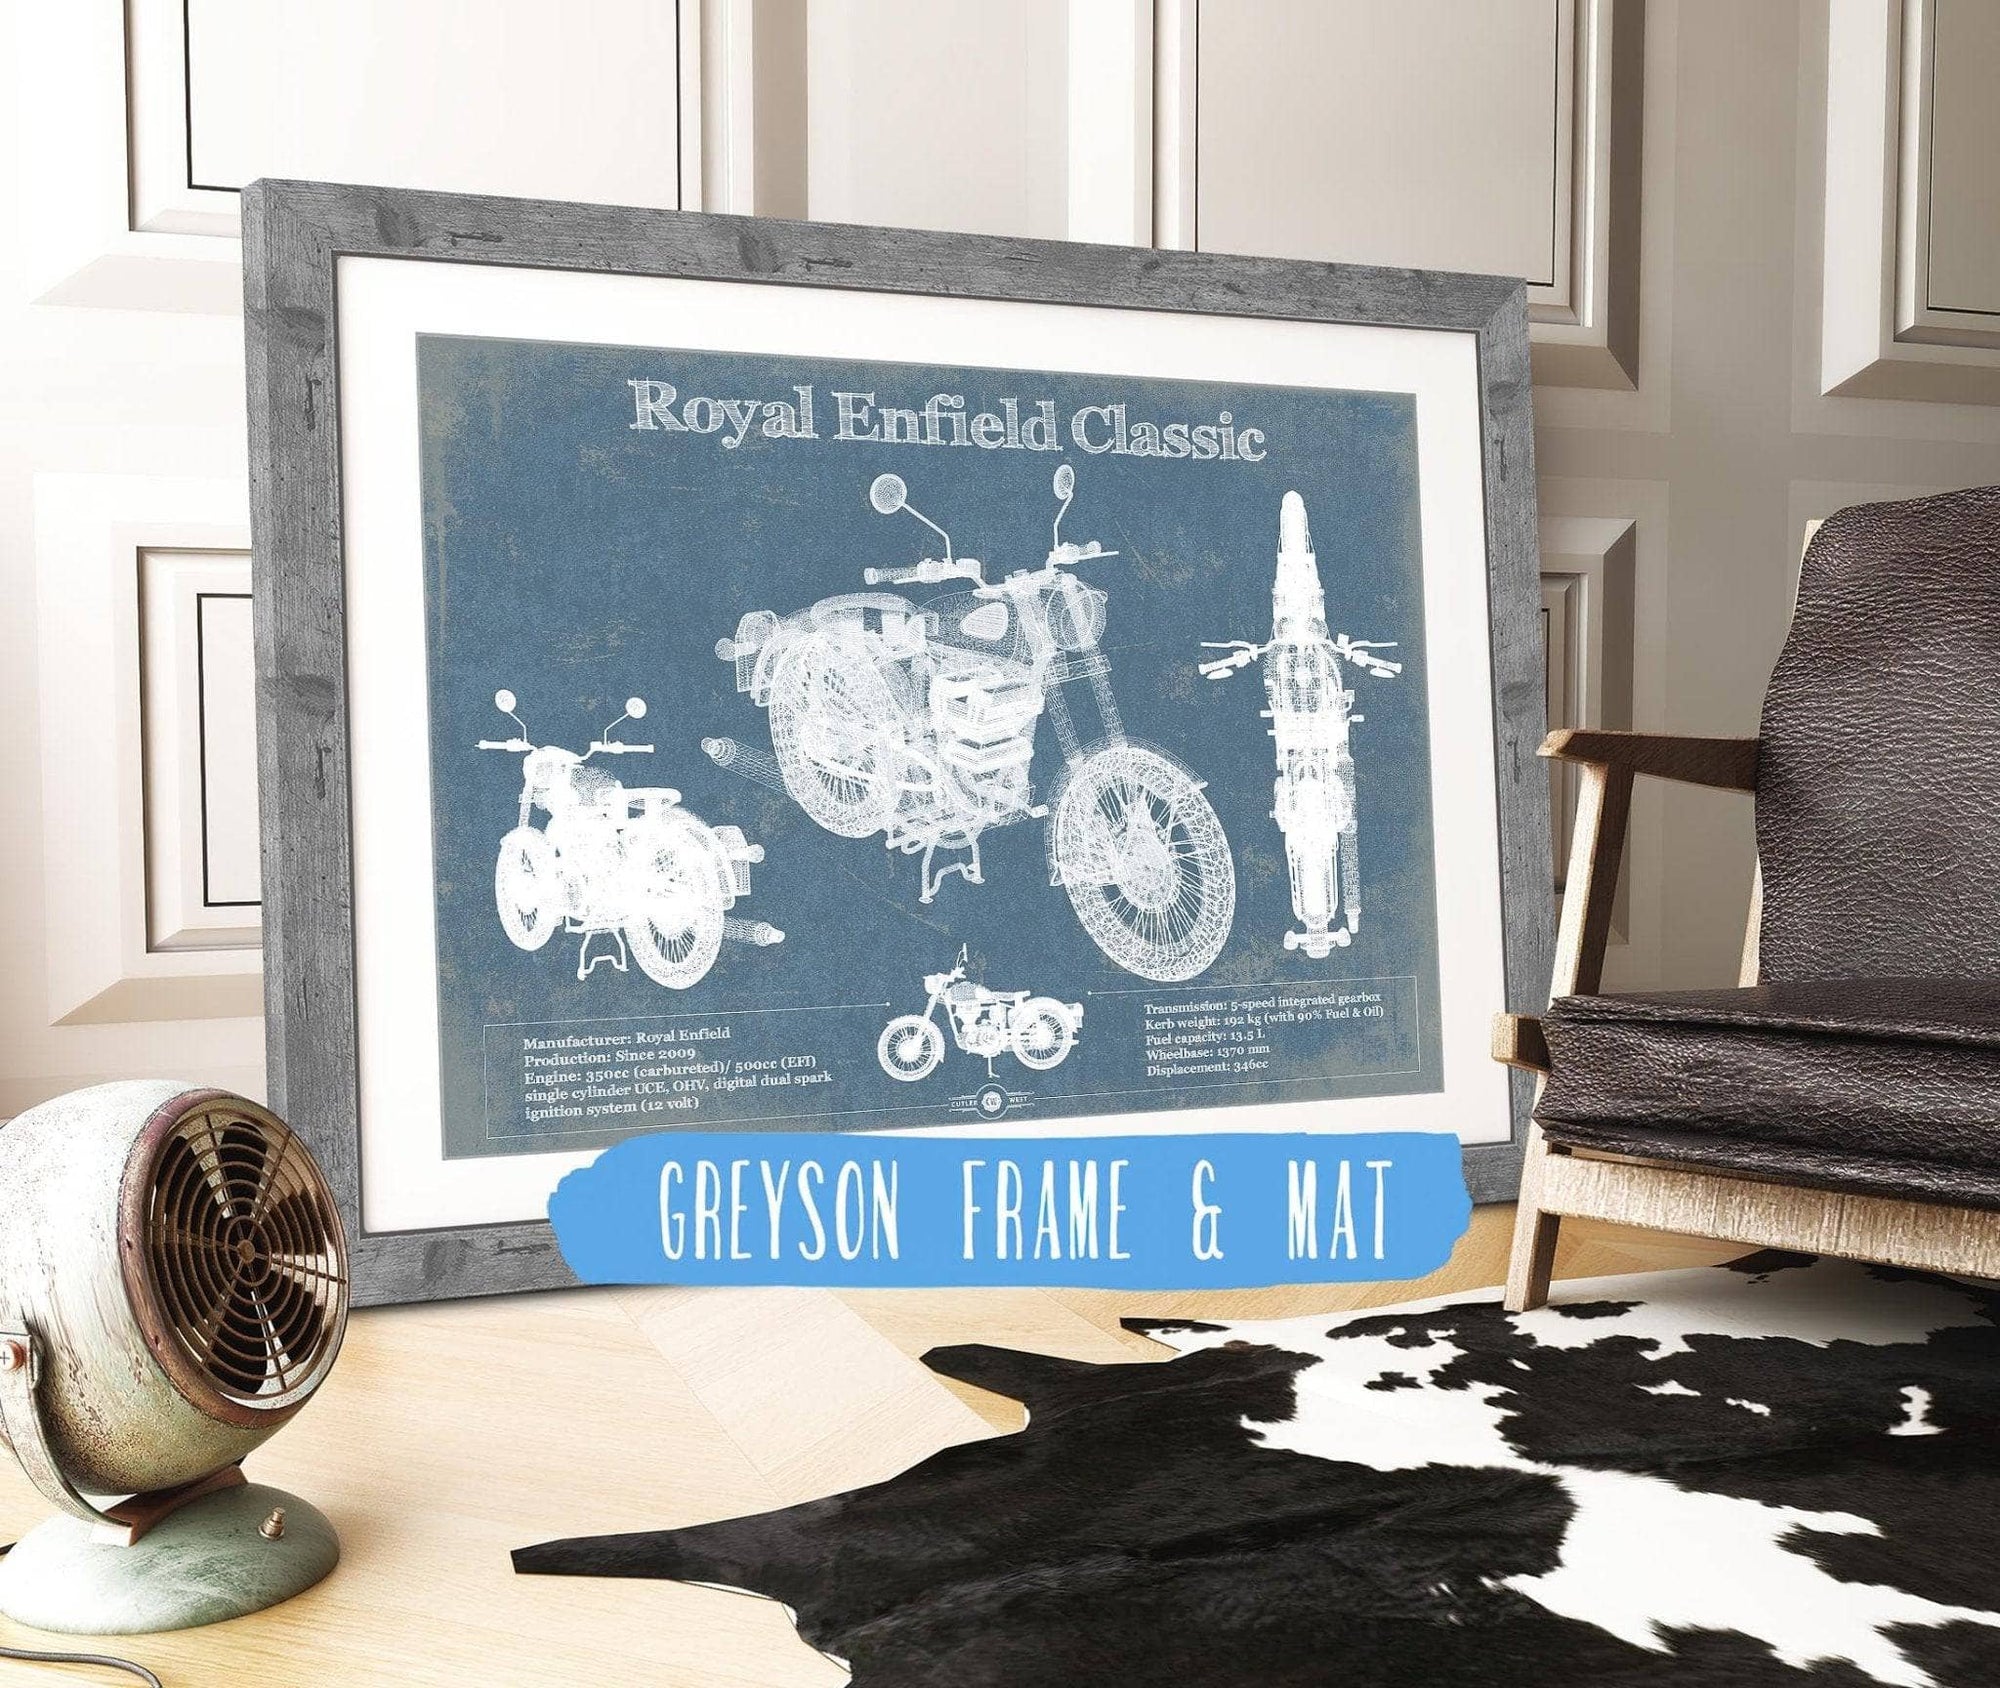 Cutler West 14" x 11" / Greyson Frame & Mat Royal Enfield Classis 350 And 500 Blueprint Motorcycle Patent Print 933350105_17680